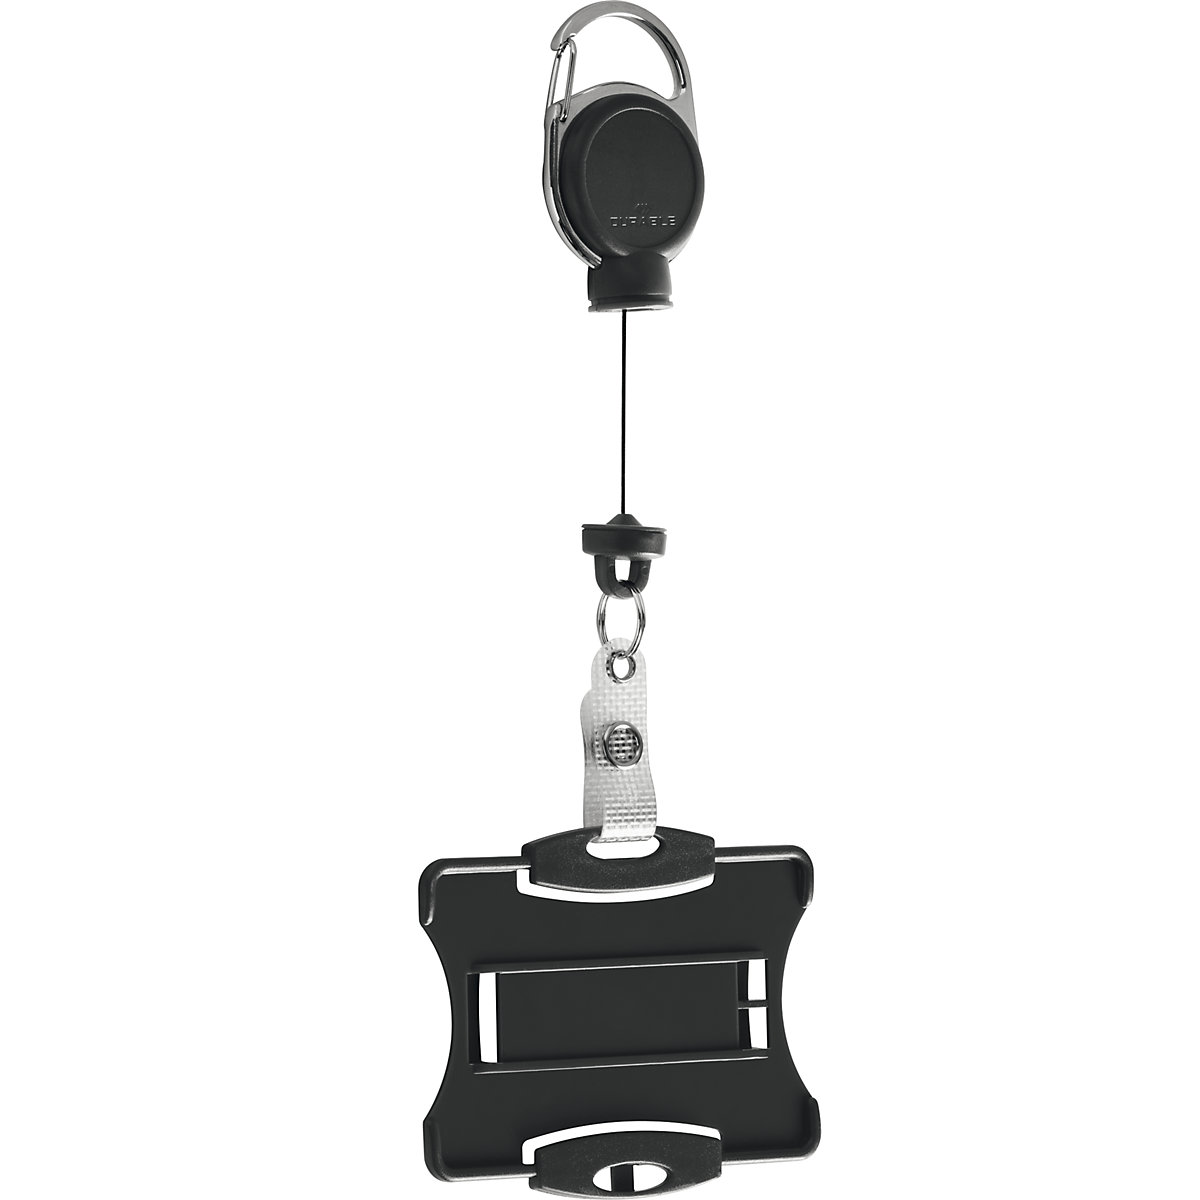 EXTRA STRONG ID badge holder with yoyo - DURABLE